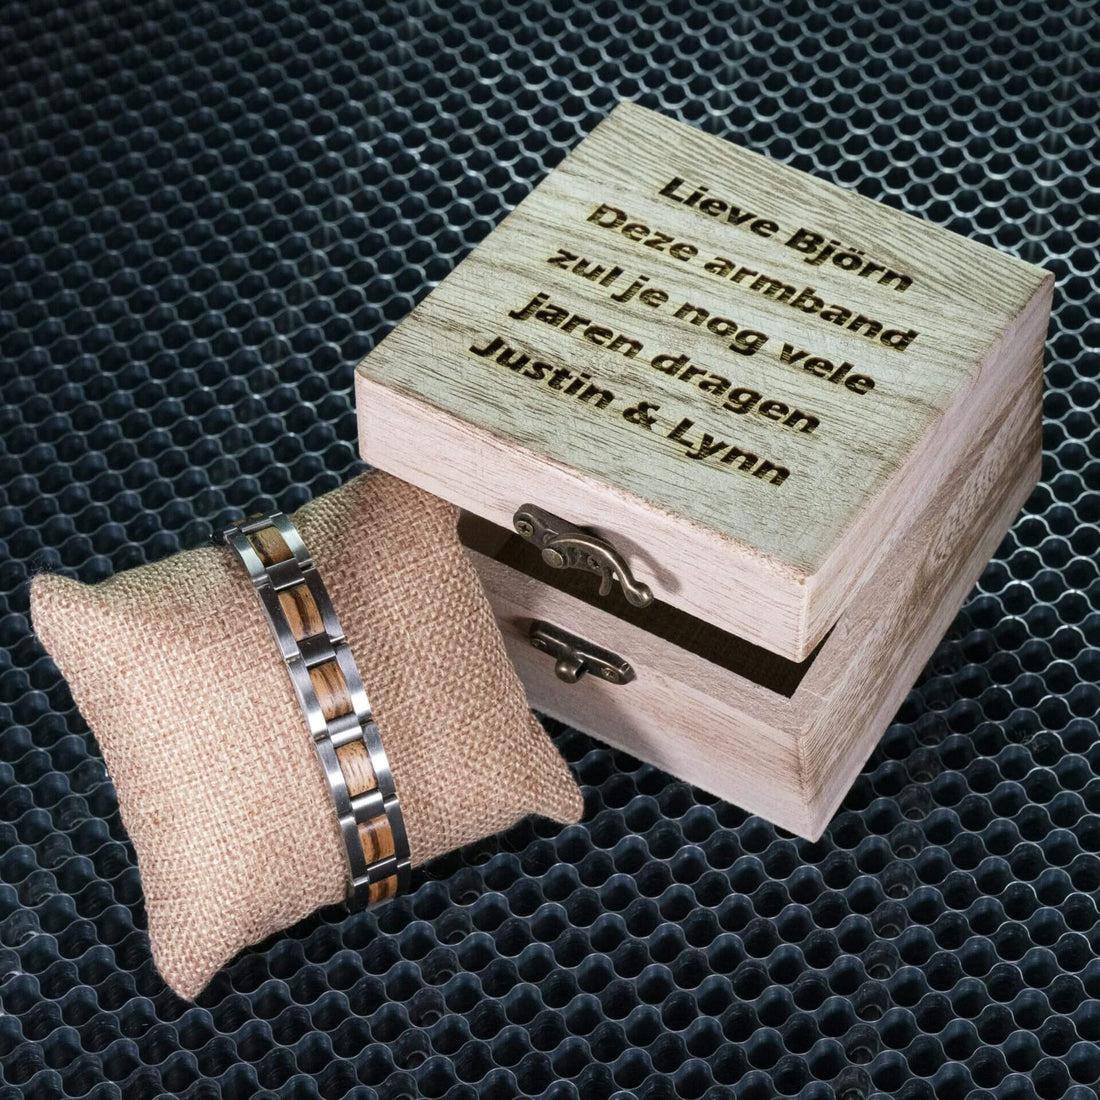 Personal wooden packaging + own text